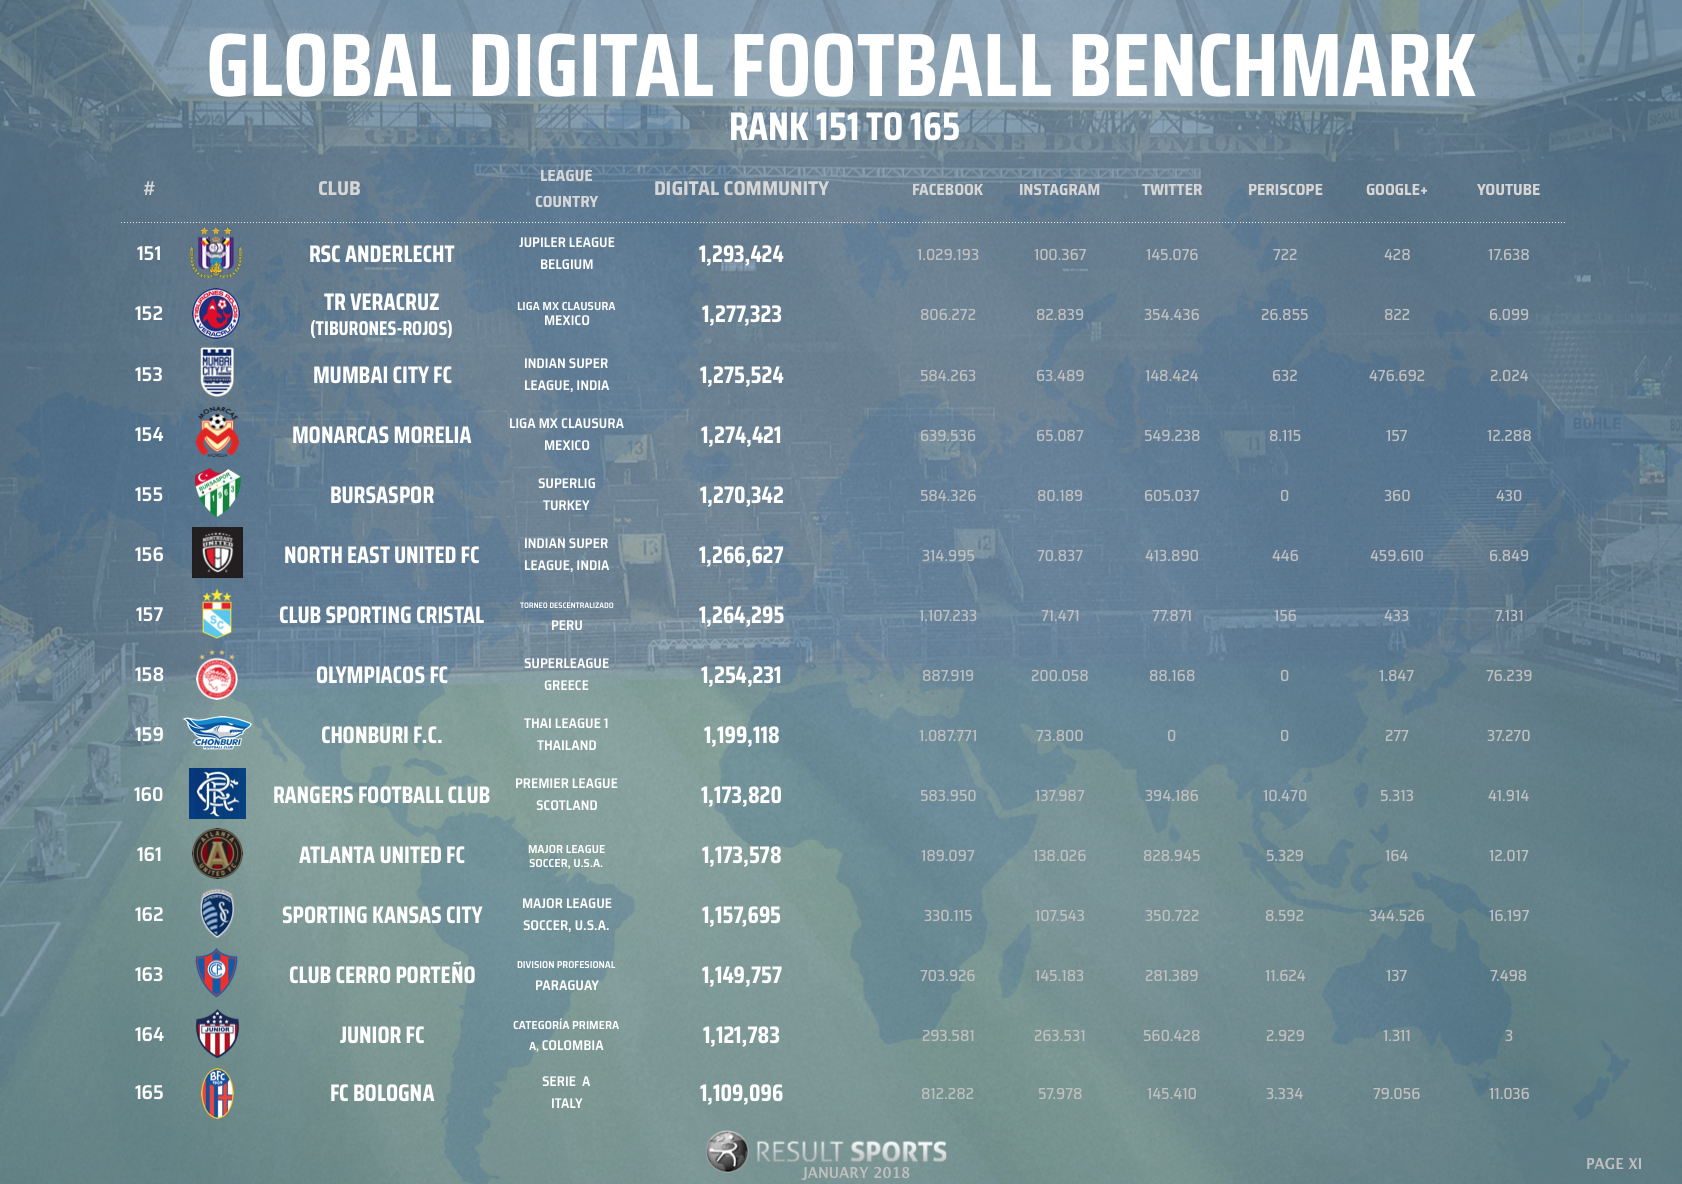 Global Football Benchmark - January 2018 - 151-165 - NEW LOOK.png